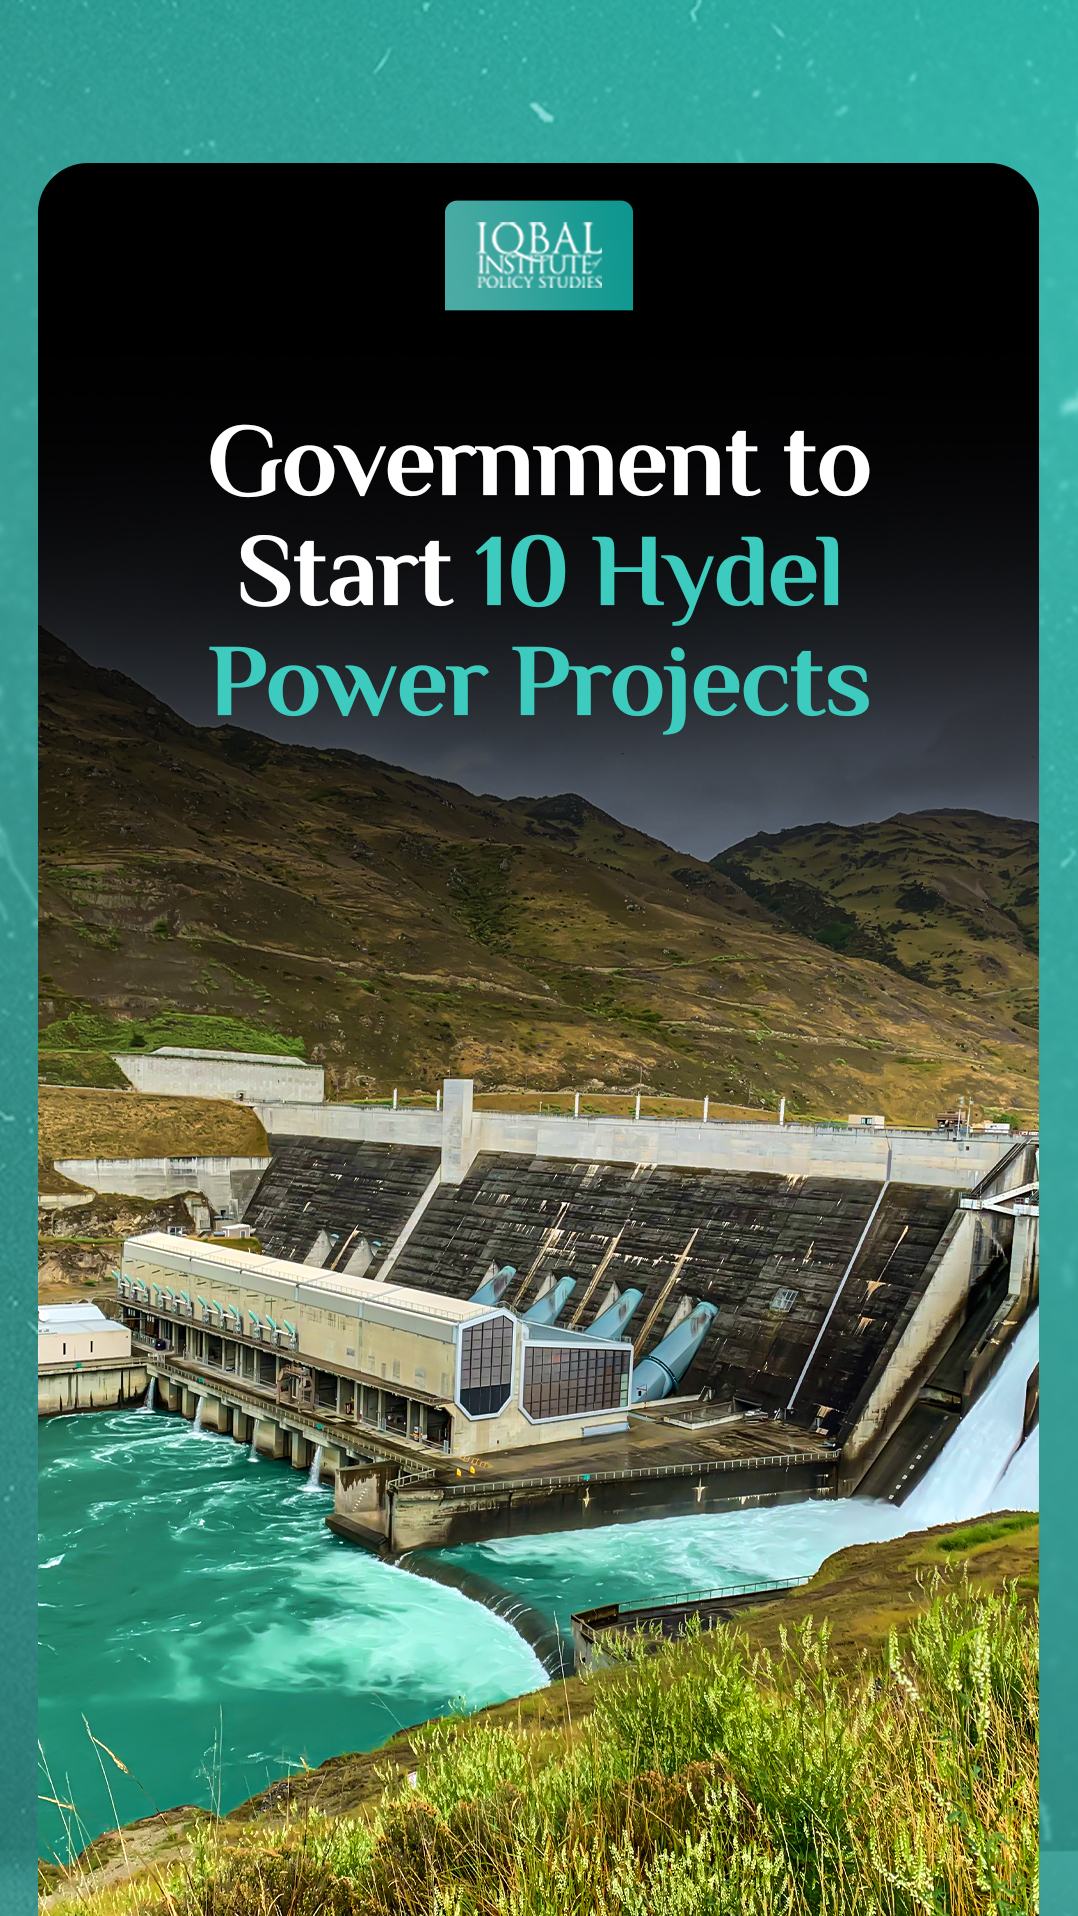 Government to start 10 Hydal Power Projects